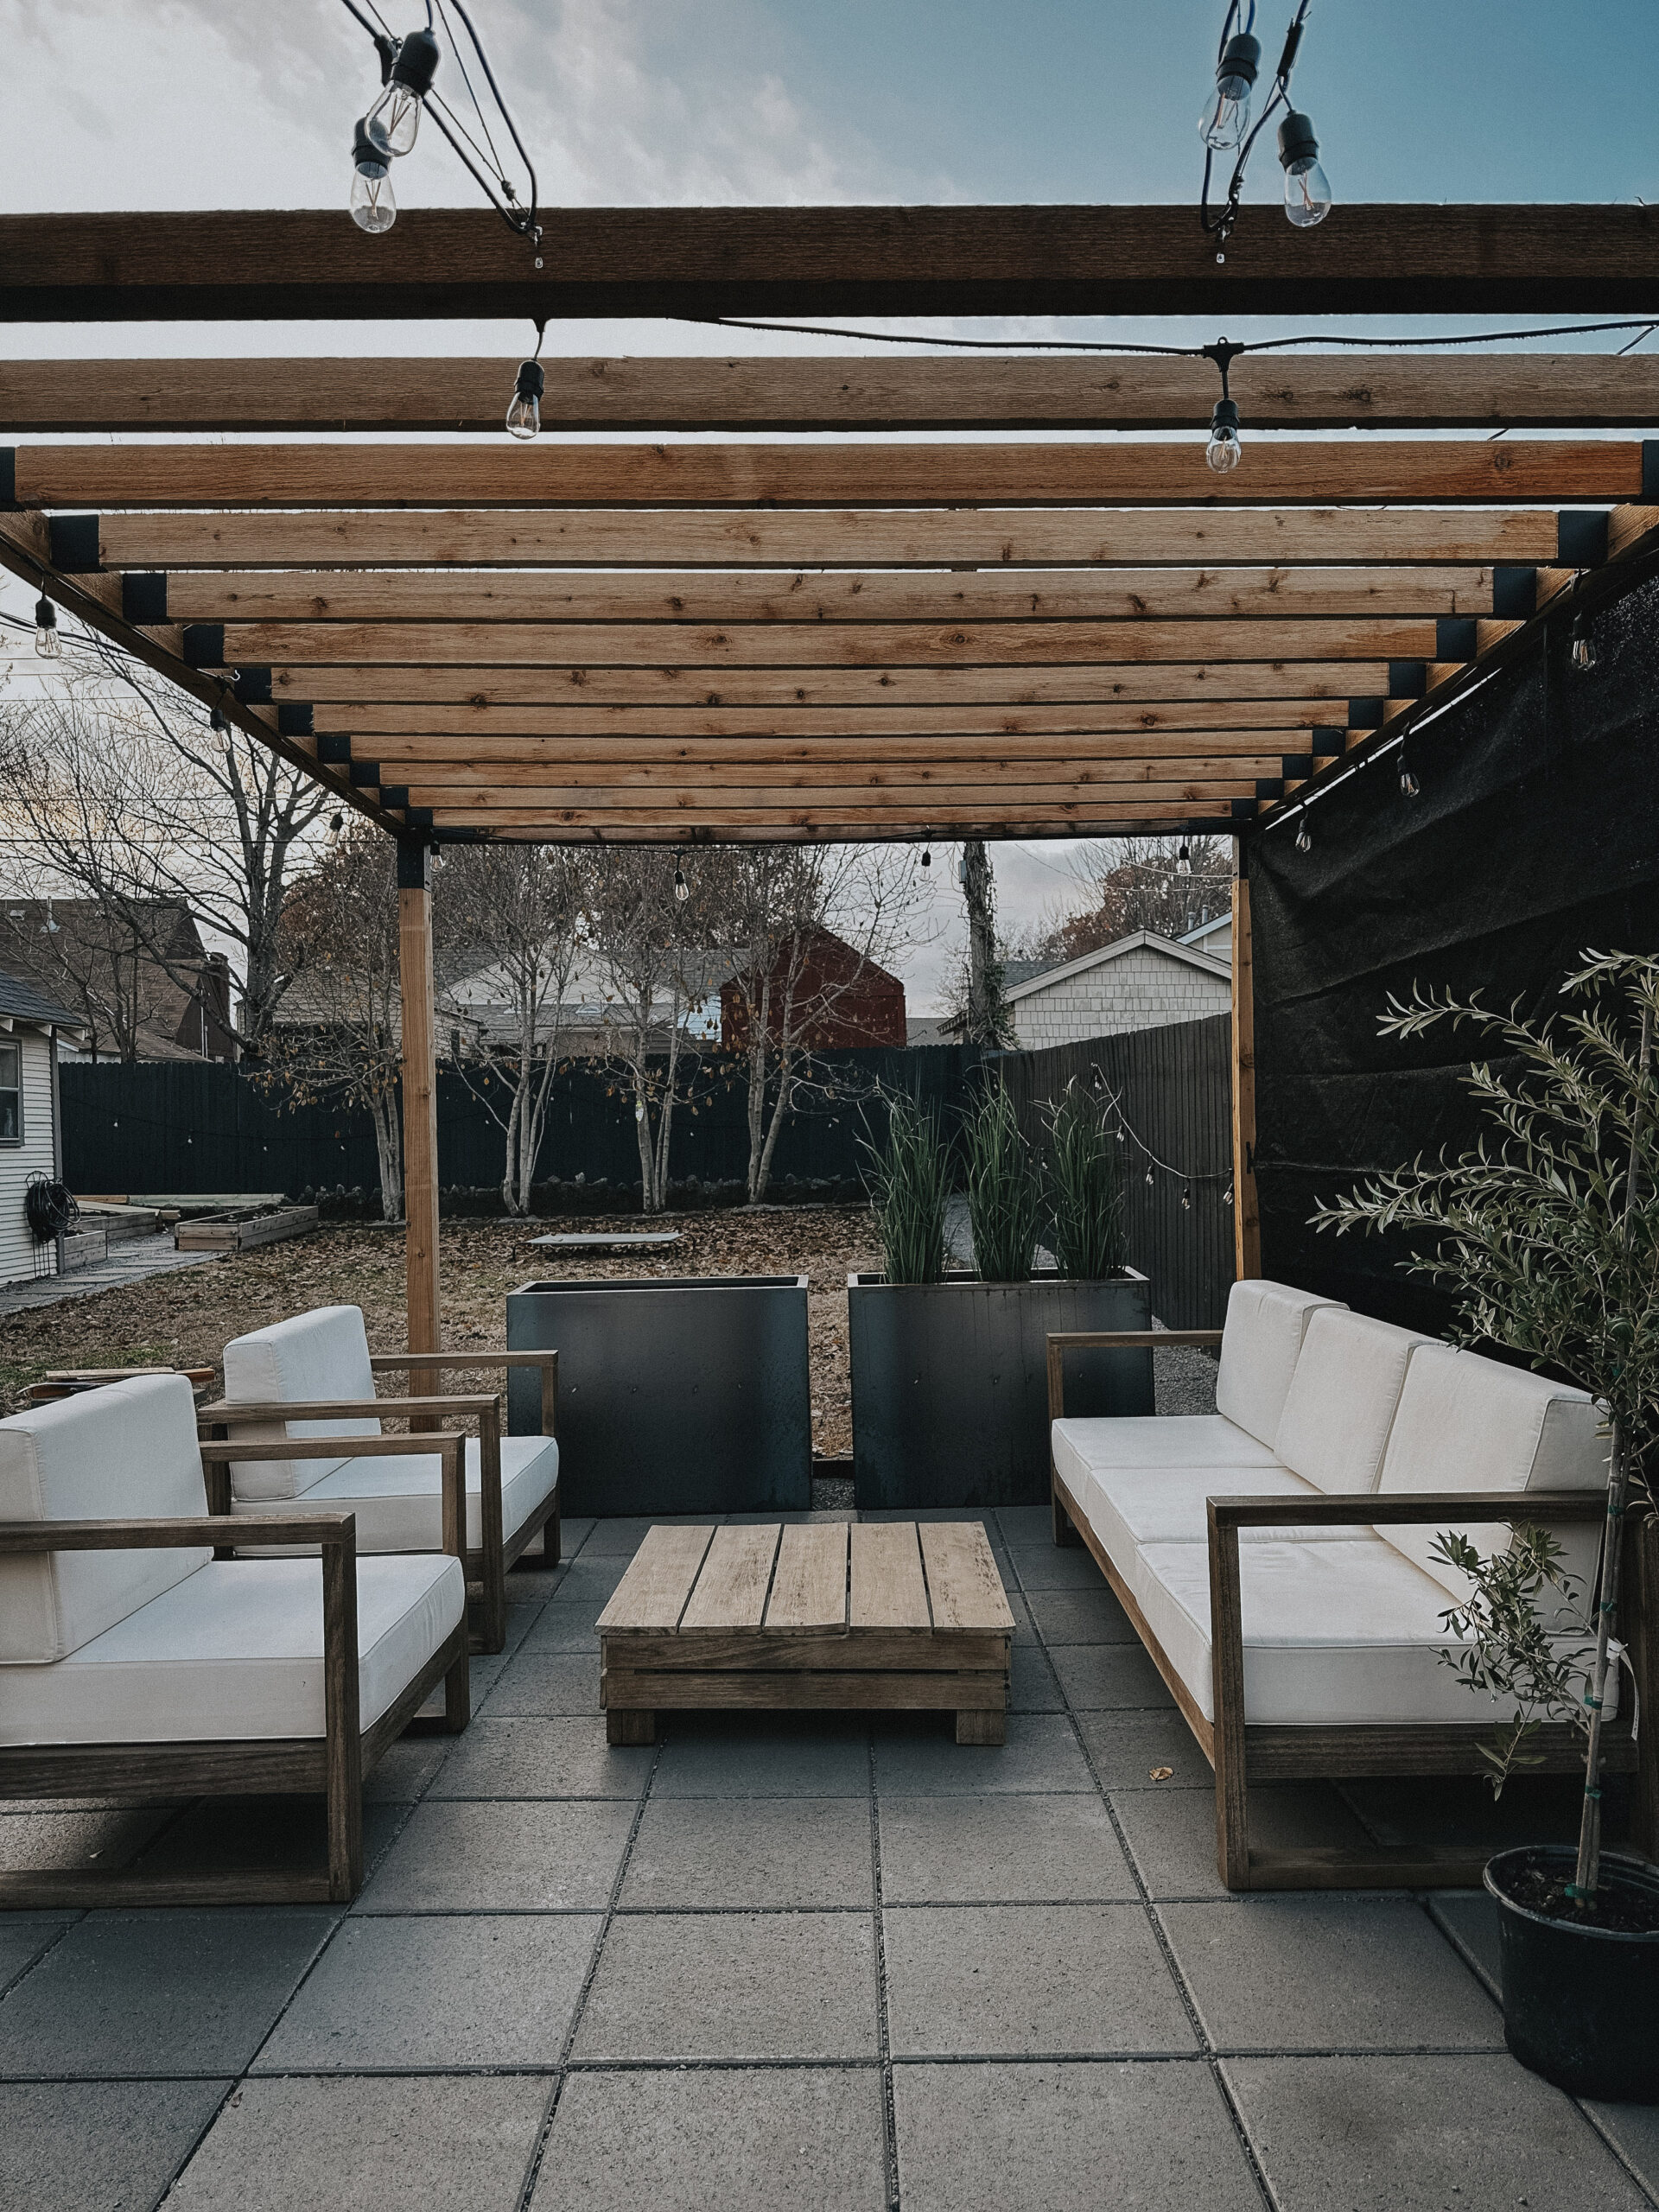 Image of pergola build, strung with lights. Furniture sits inside the pergola space, which was built on a base of gravel and pavers.